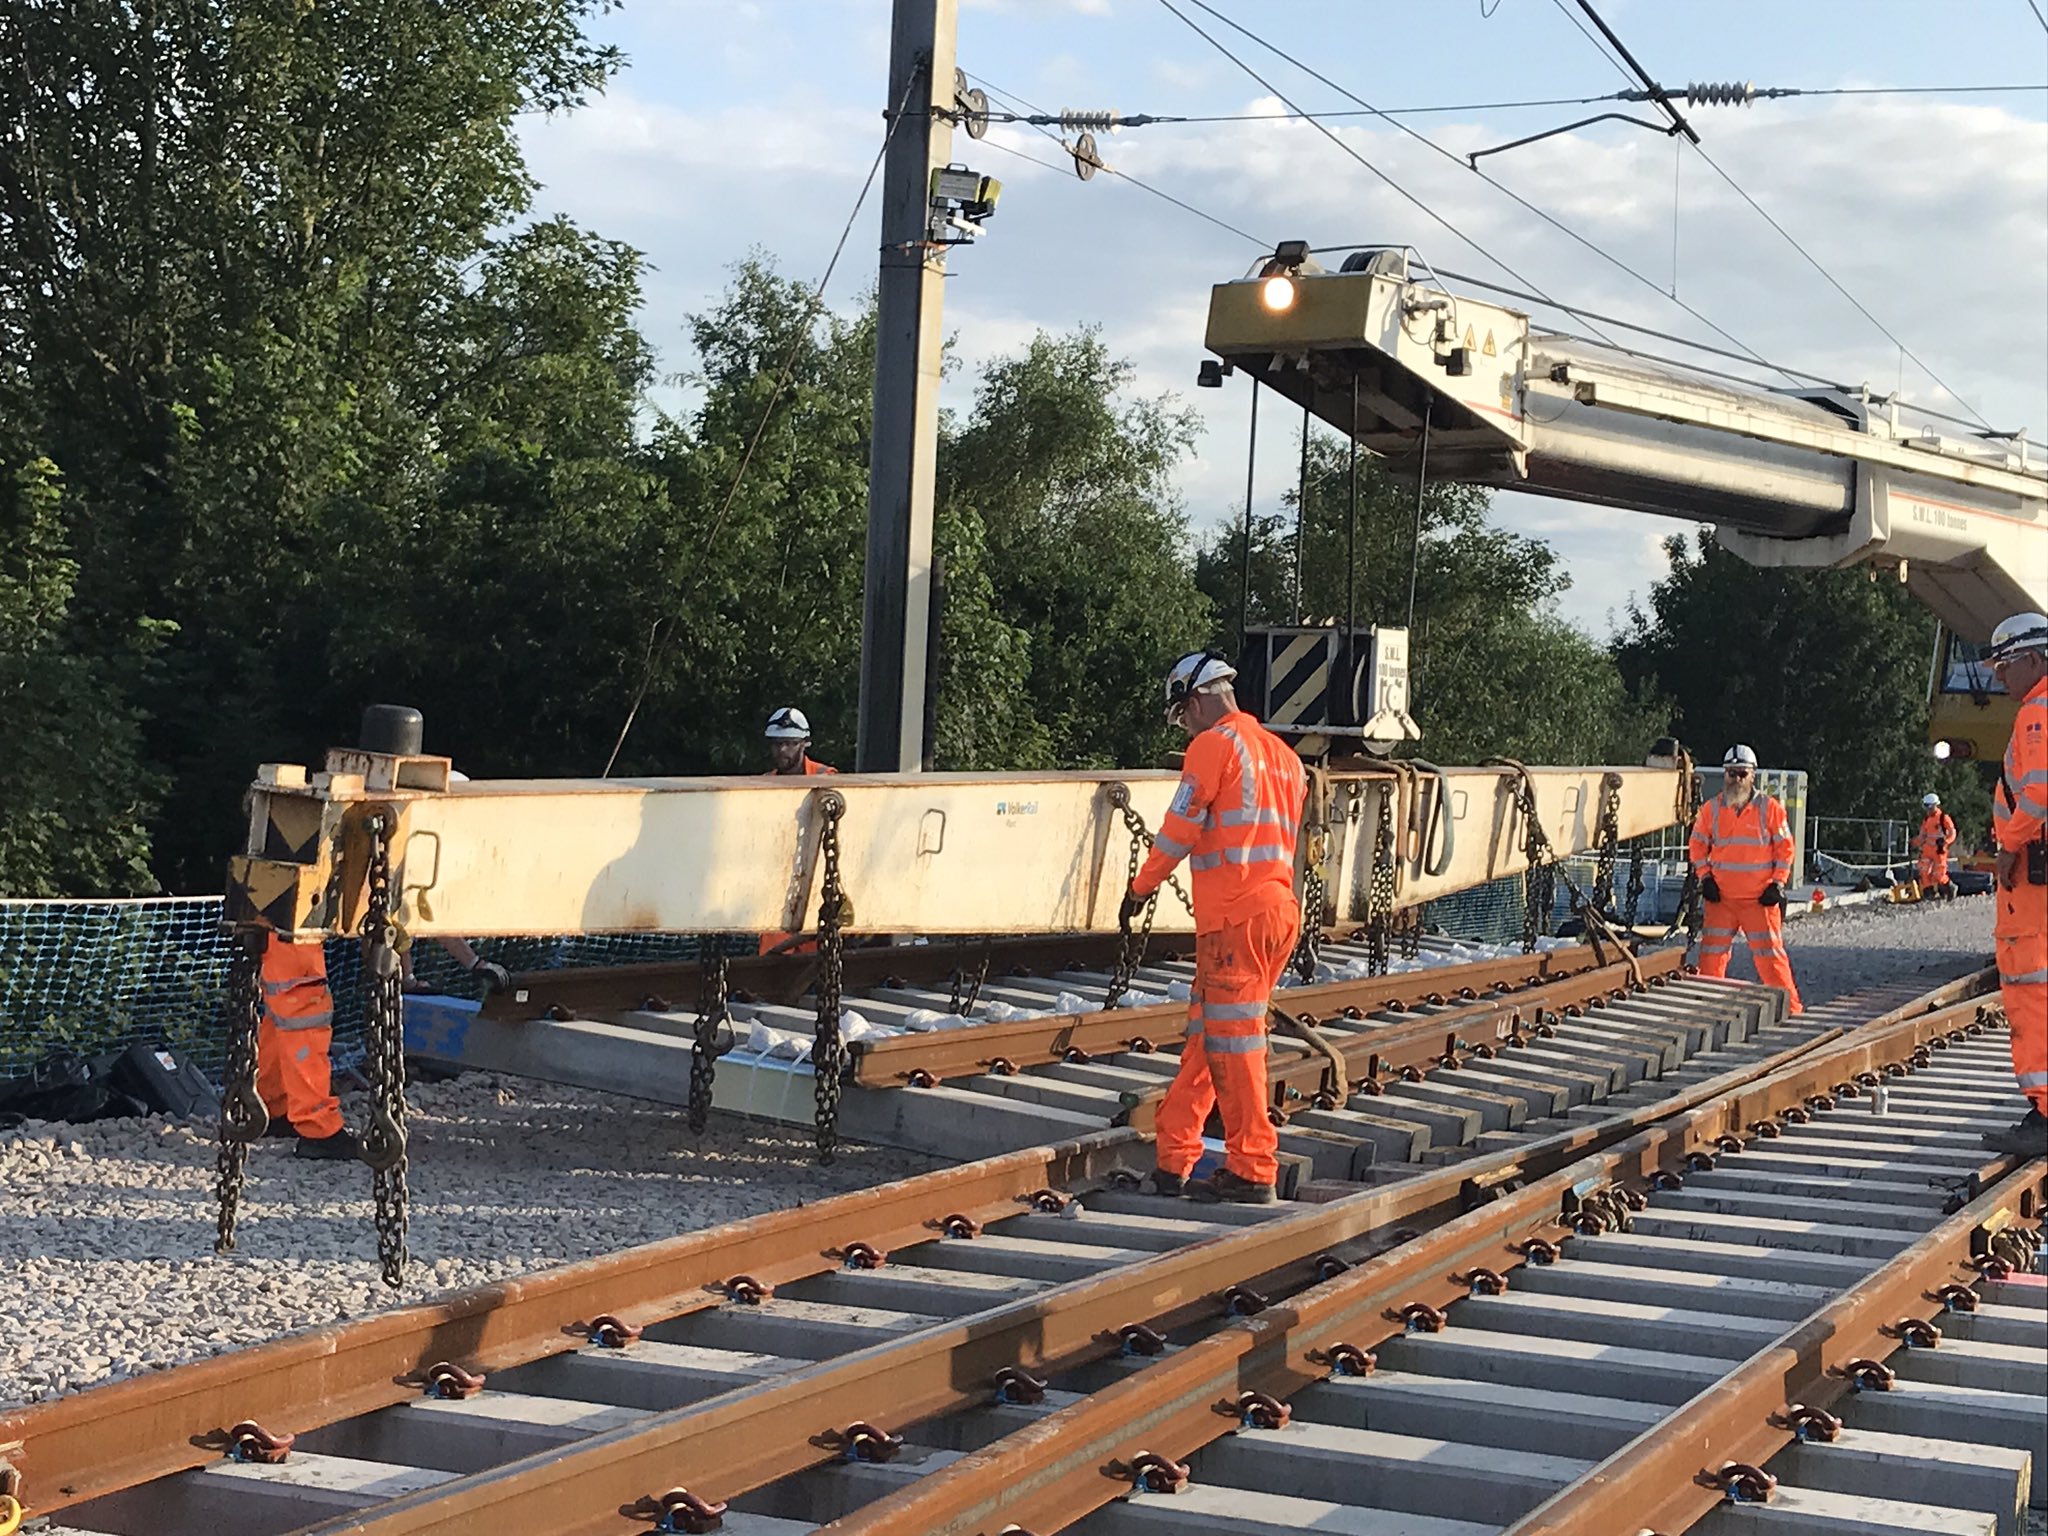 Planned track works mean more trains on time on the Great Eastern Main Line  - Rail Engineer